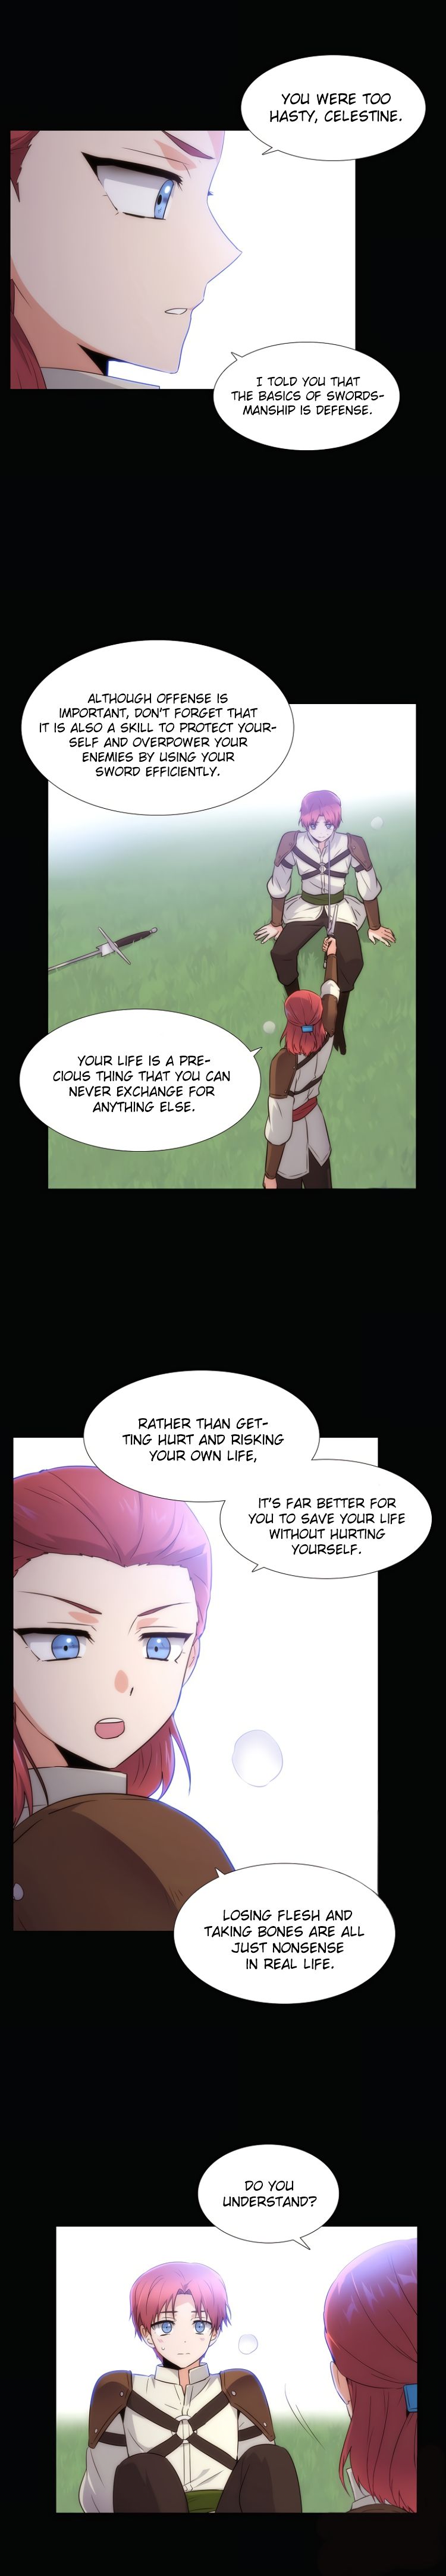 The Villain Discovered My Identity - Chapter 10 Page 2